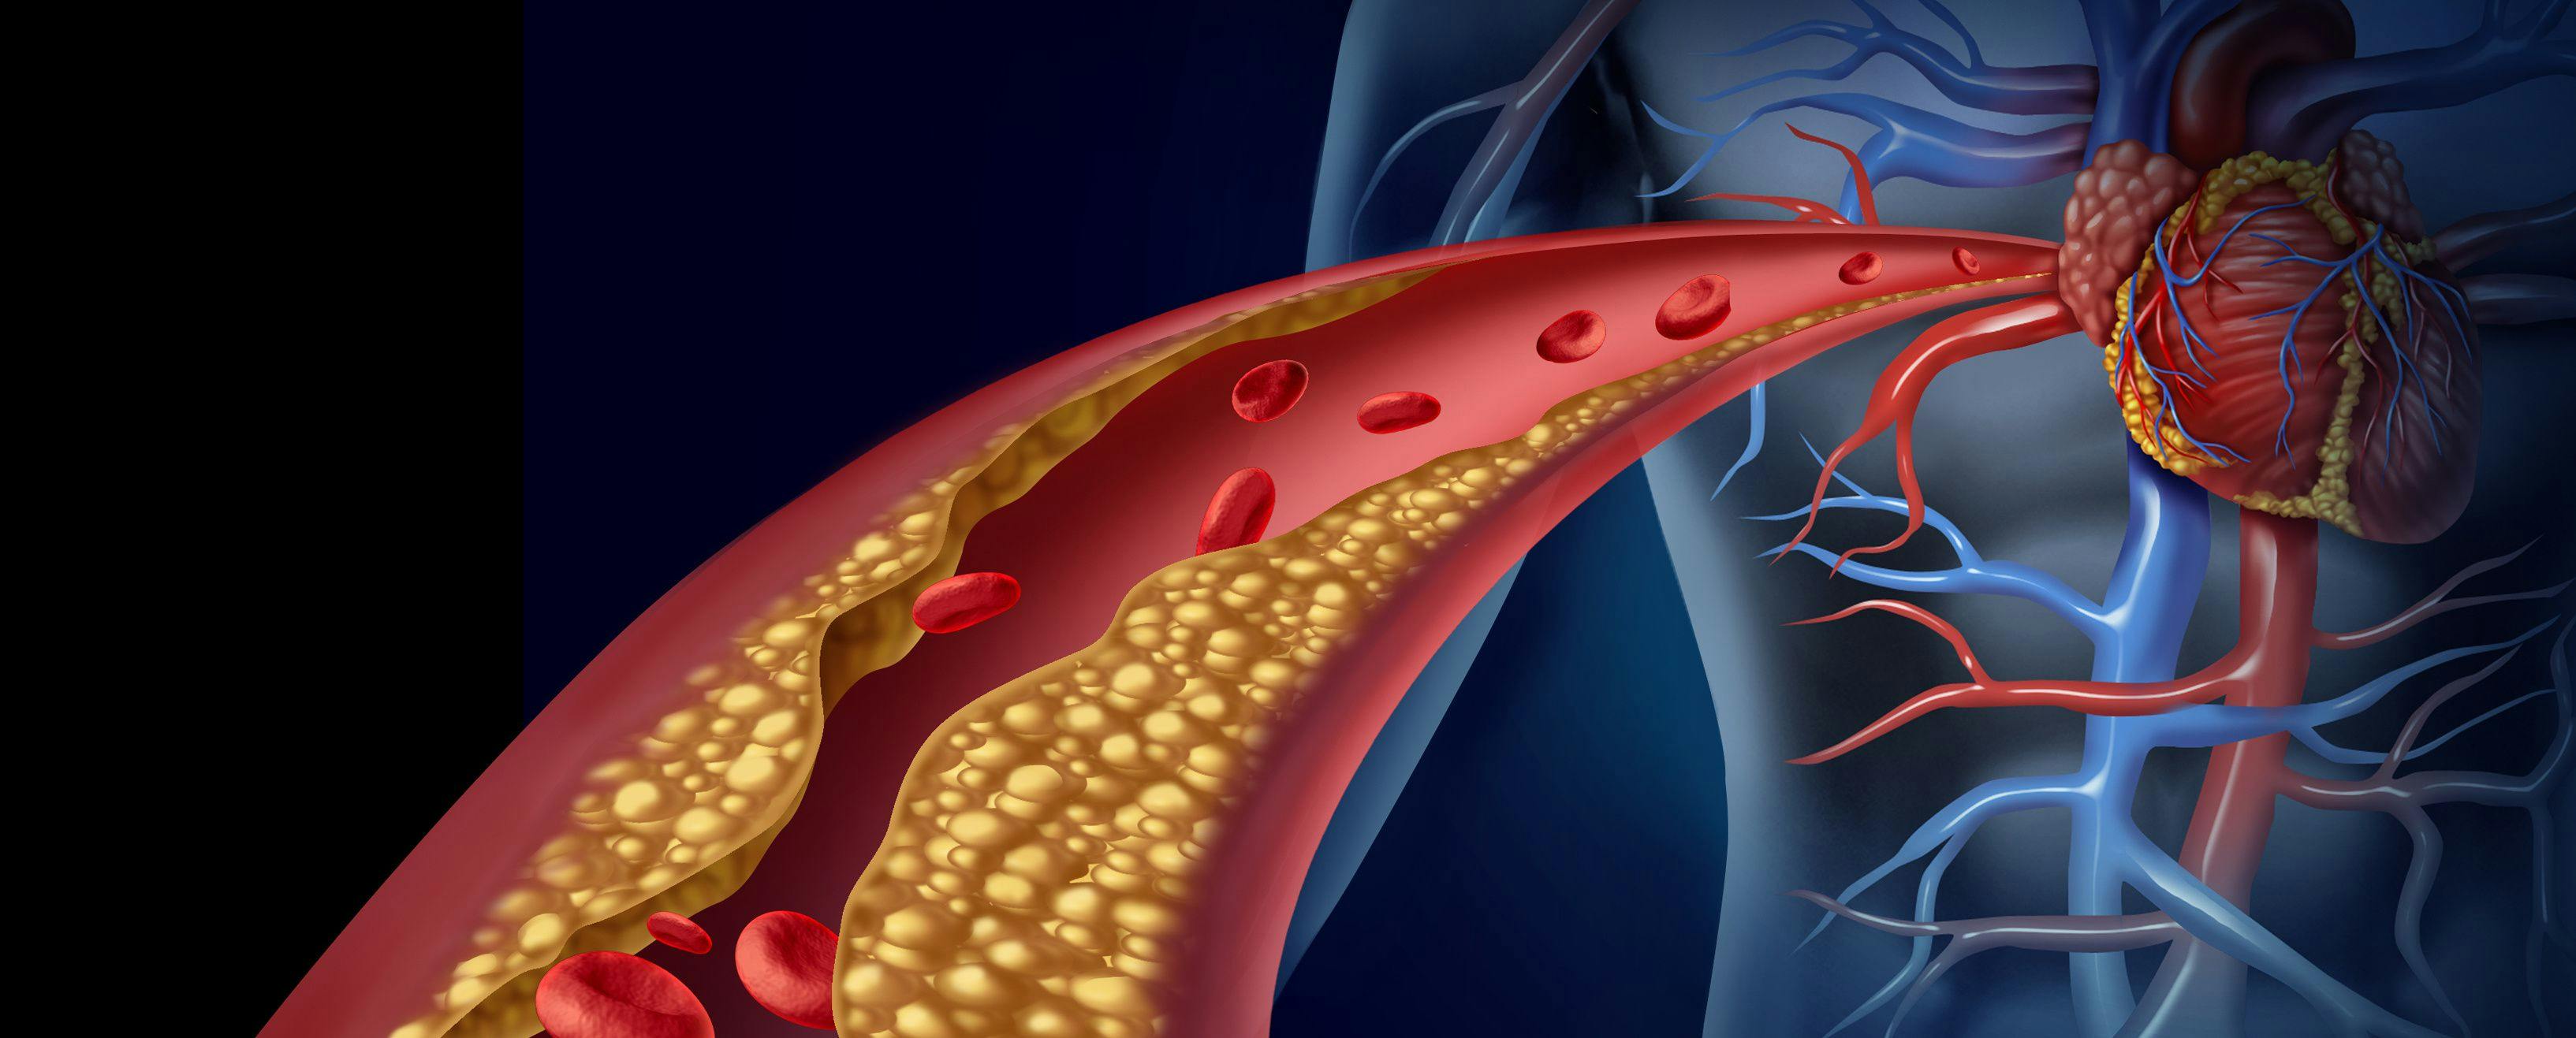 Hypercholesterolemia Treatment Granted FDA Priority Review